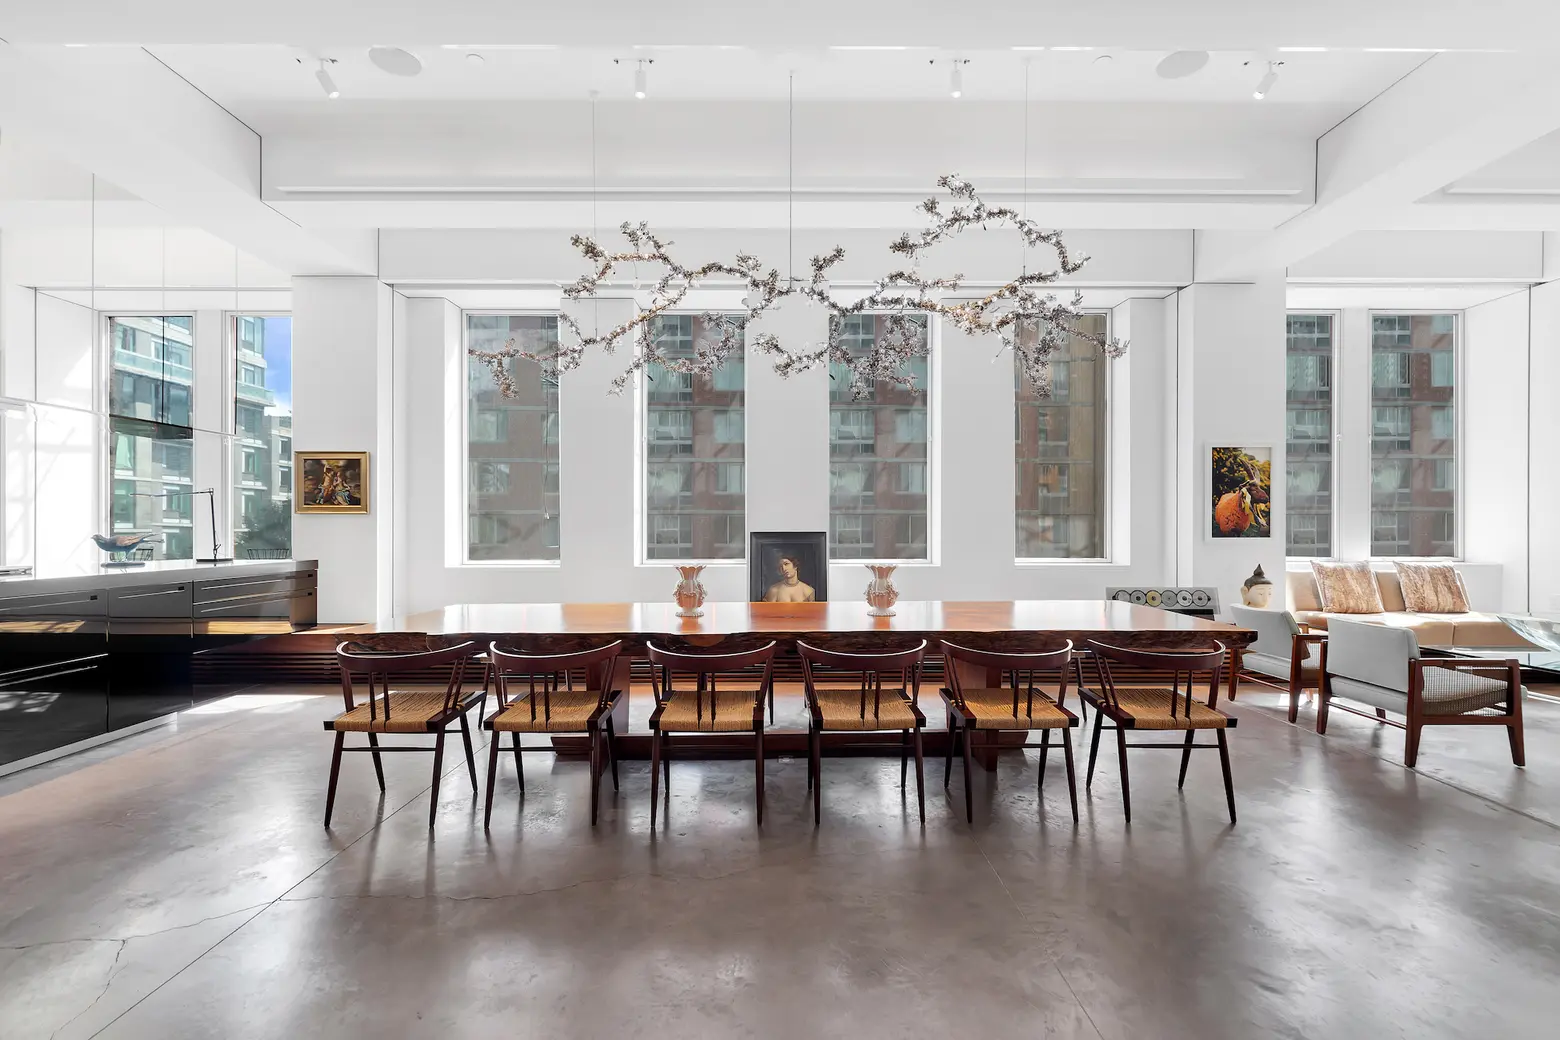 The fab furniture is included in this $11.5M gallery-like Chelsea loft; the art is up to you